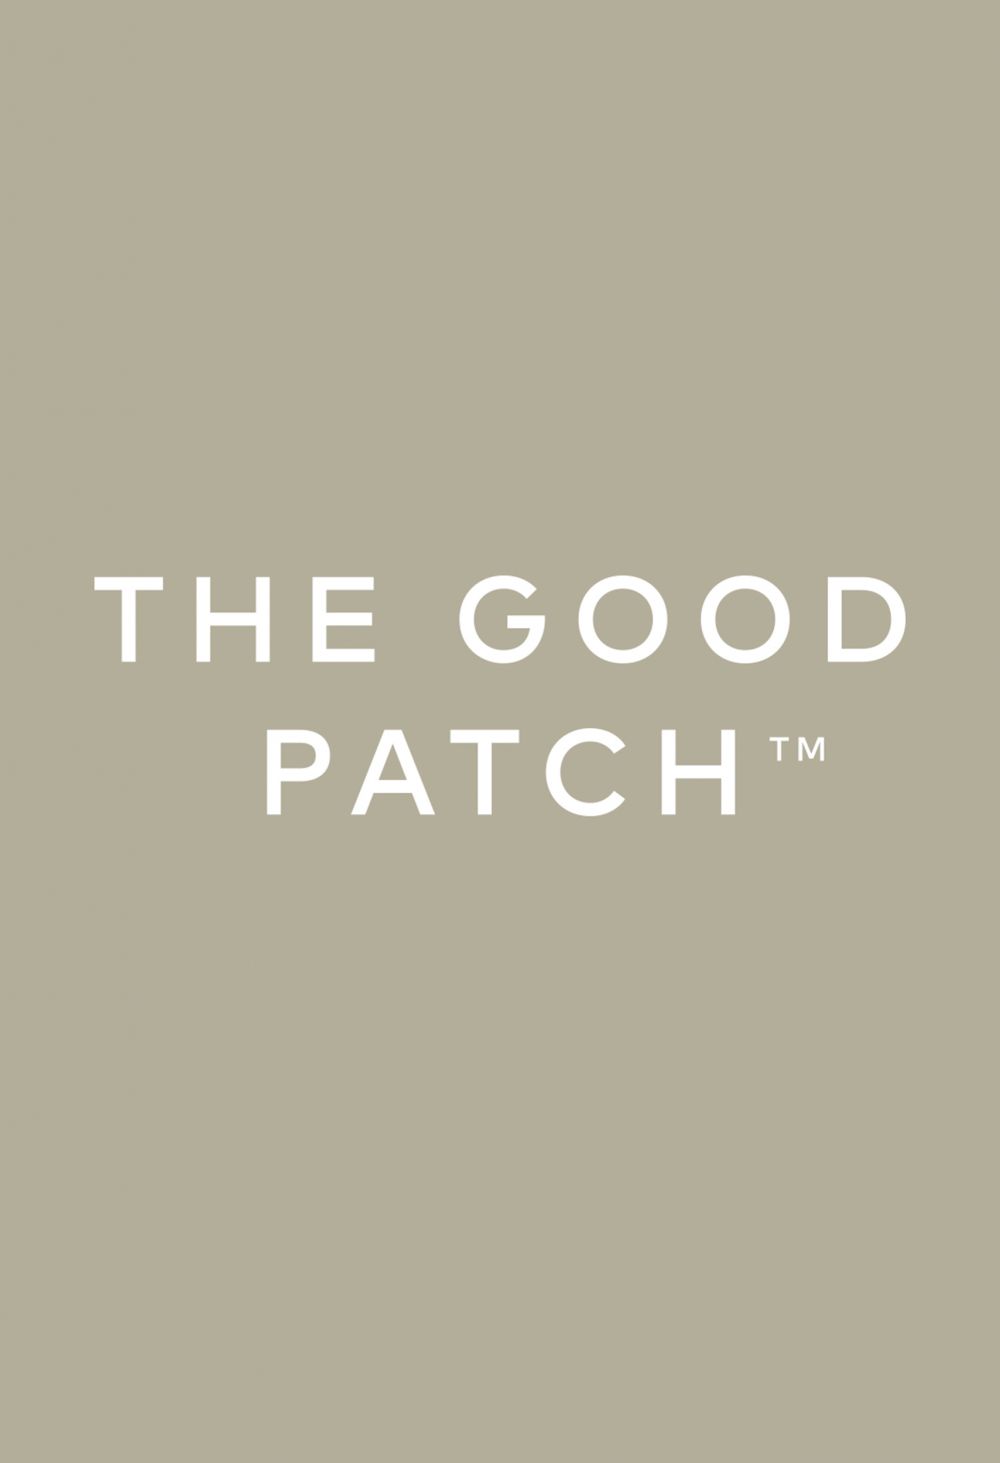 THE GOOD PATCH